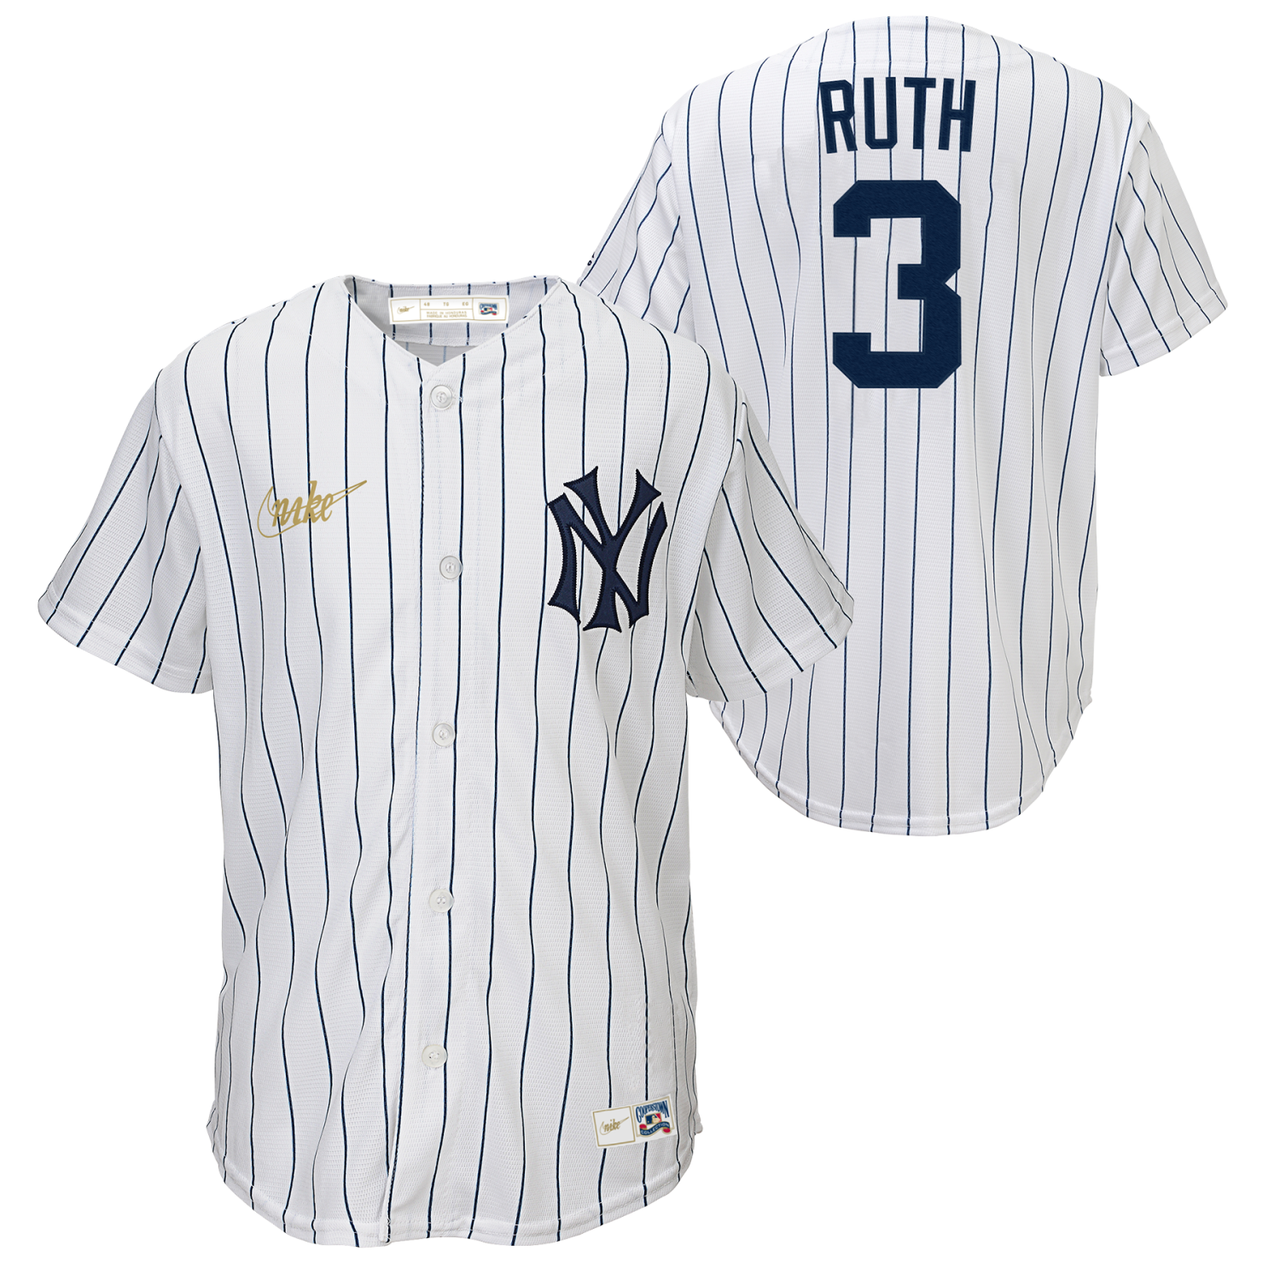 Babe Ruth Youth Jersey - Official Ruth Kids Jersey by Nike